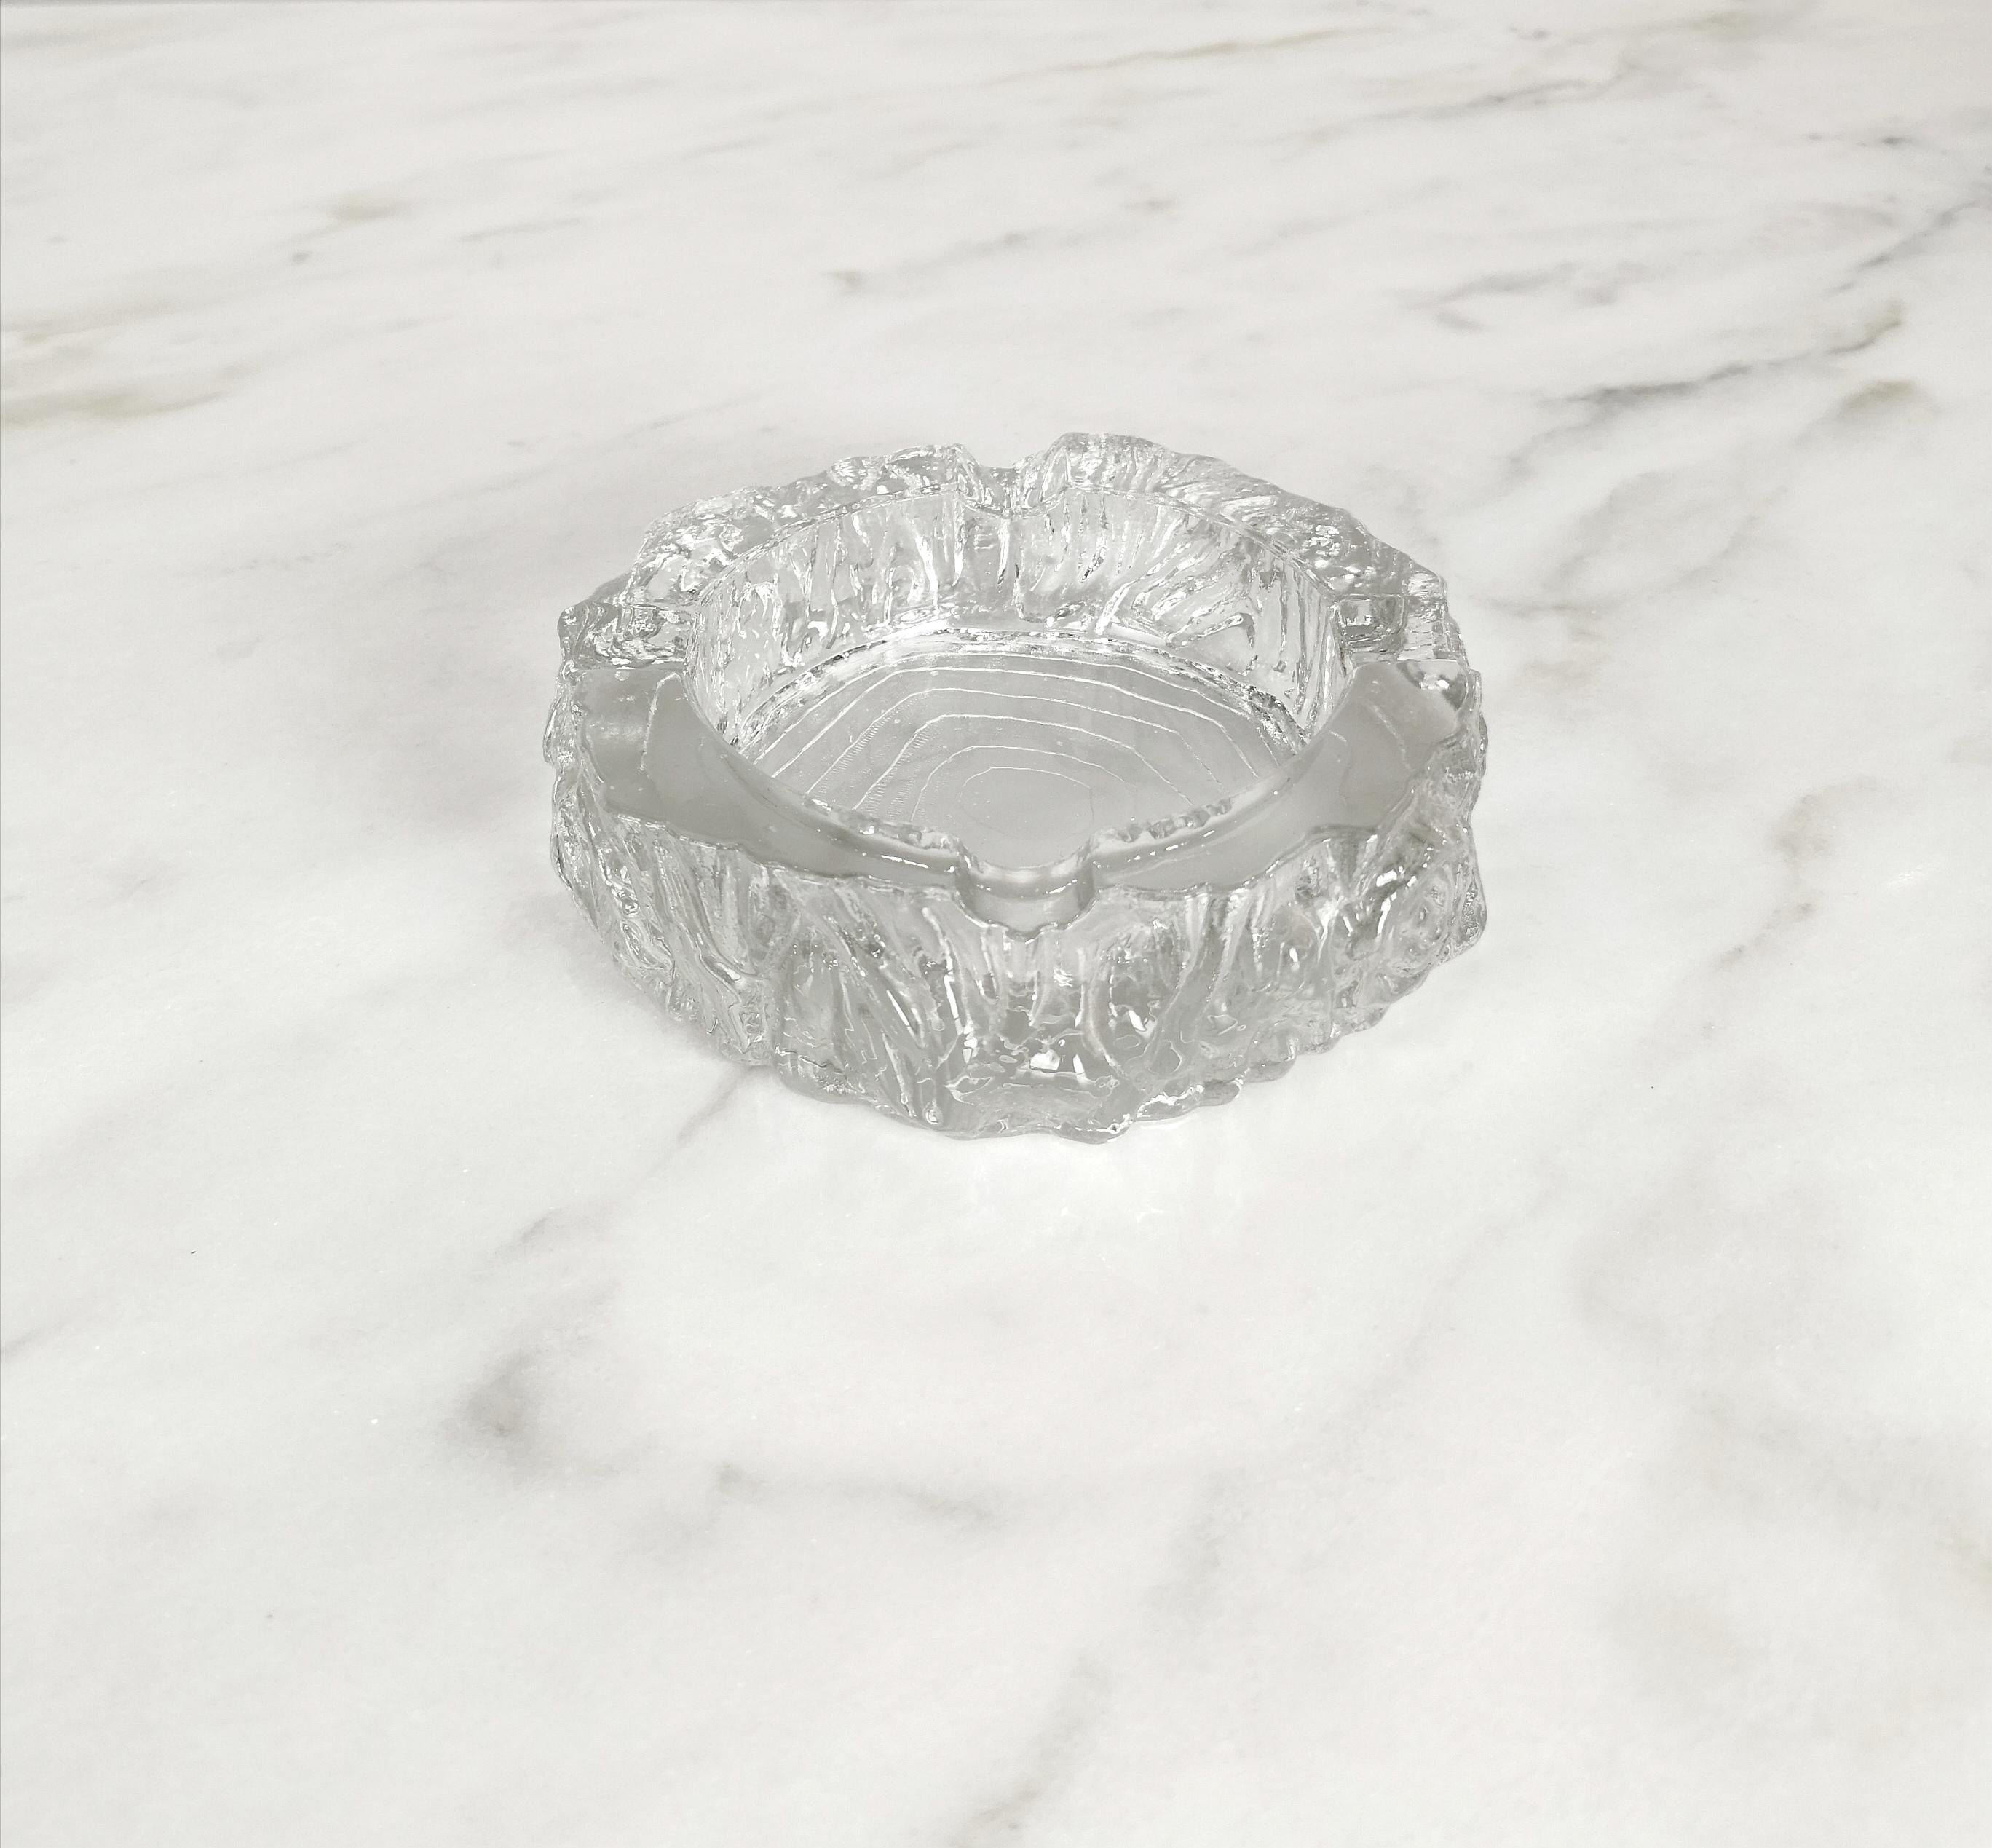 Ashtray produced in Italy in the 70s.
The circular ashtray was made of transparent Murano glass with a particular technique that gives a 